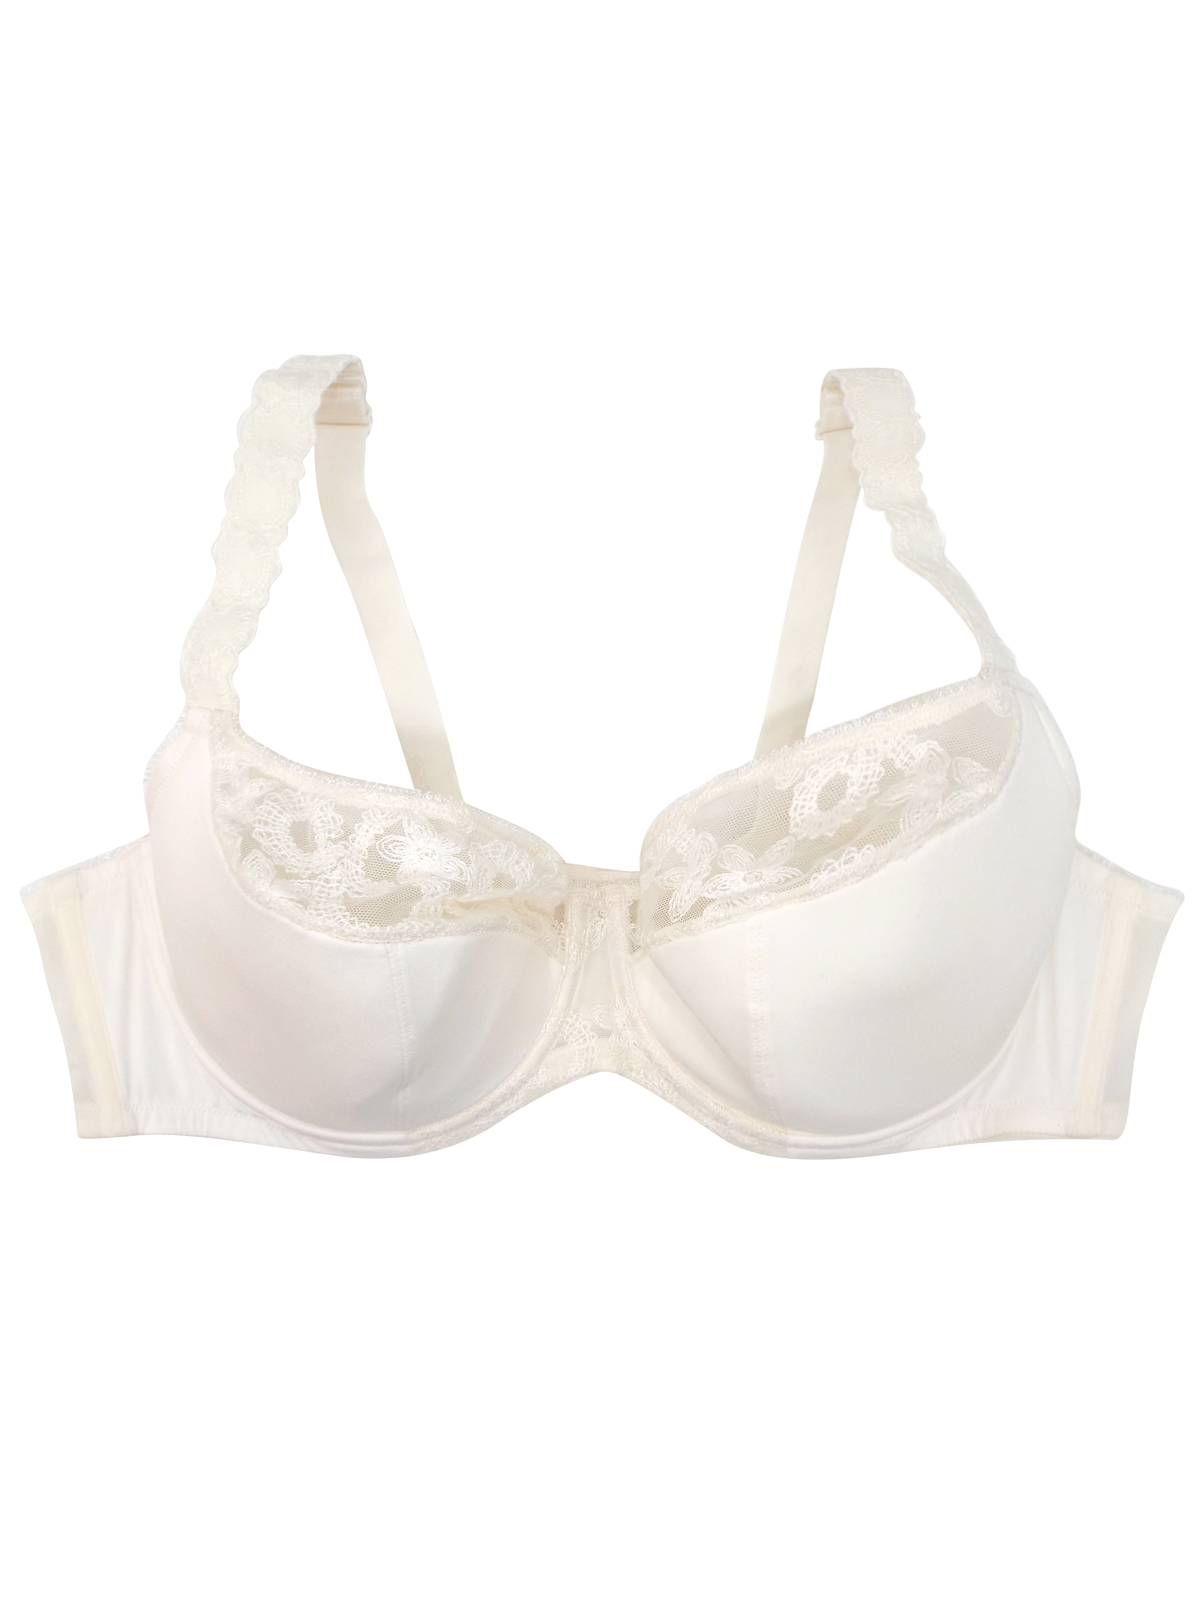 Penningtons - - Penningtons CREAM Floral Lace Underwired Full Cup Bra - Size  42 to 46 (C-D-DD-F